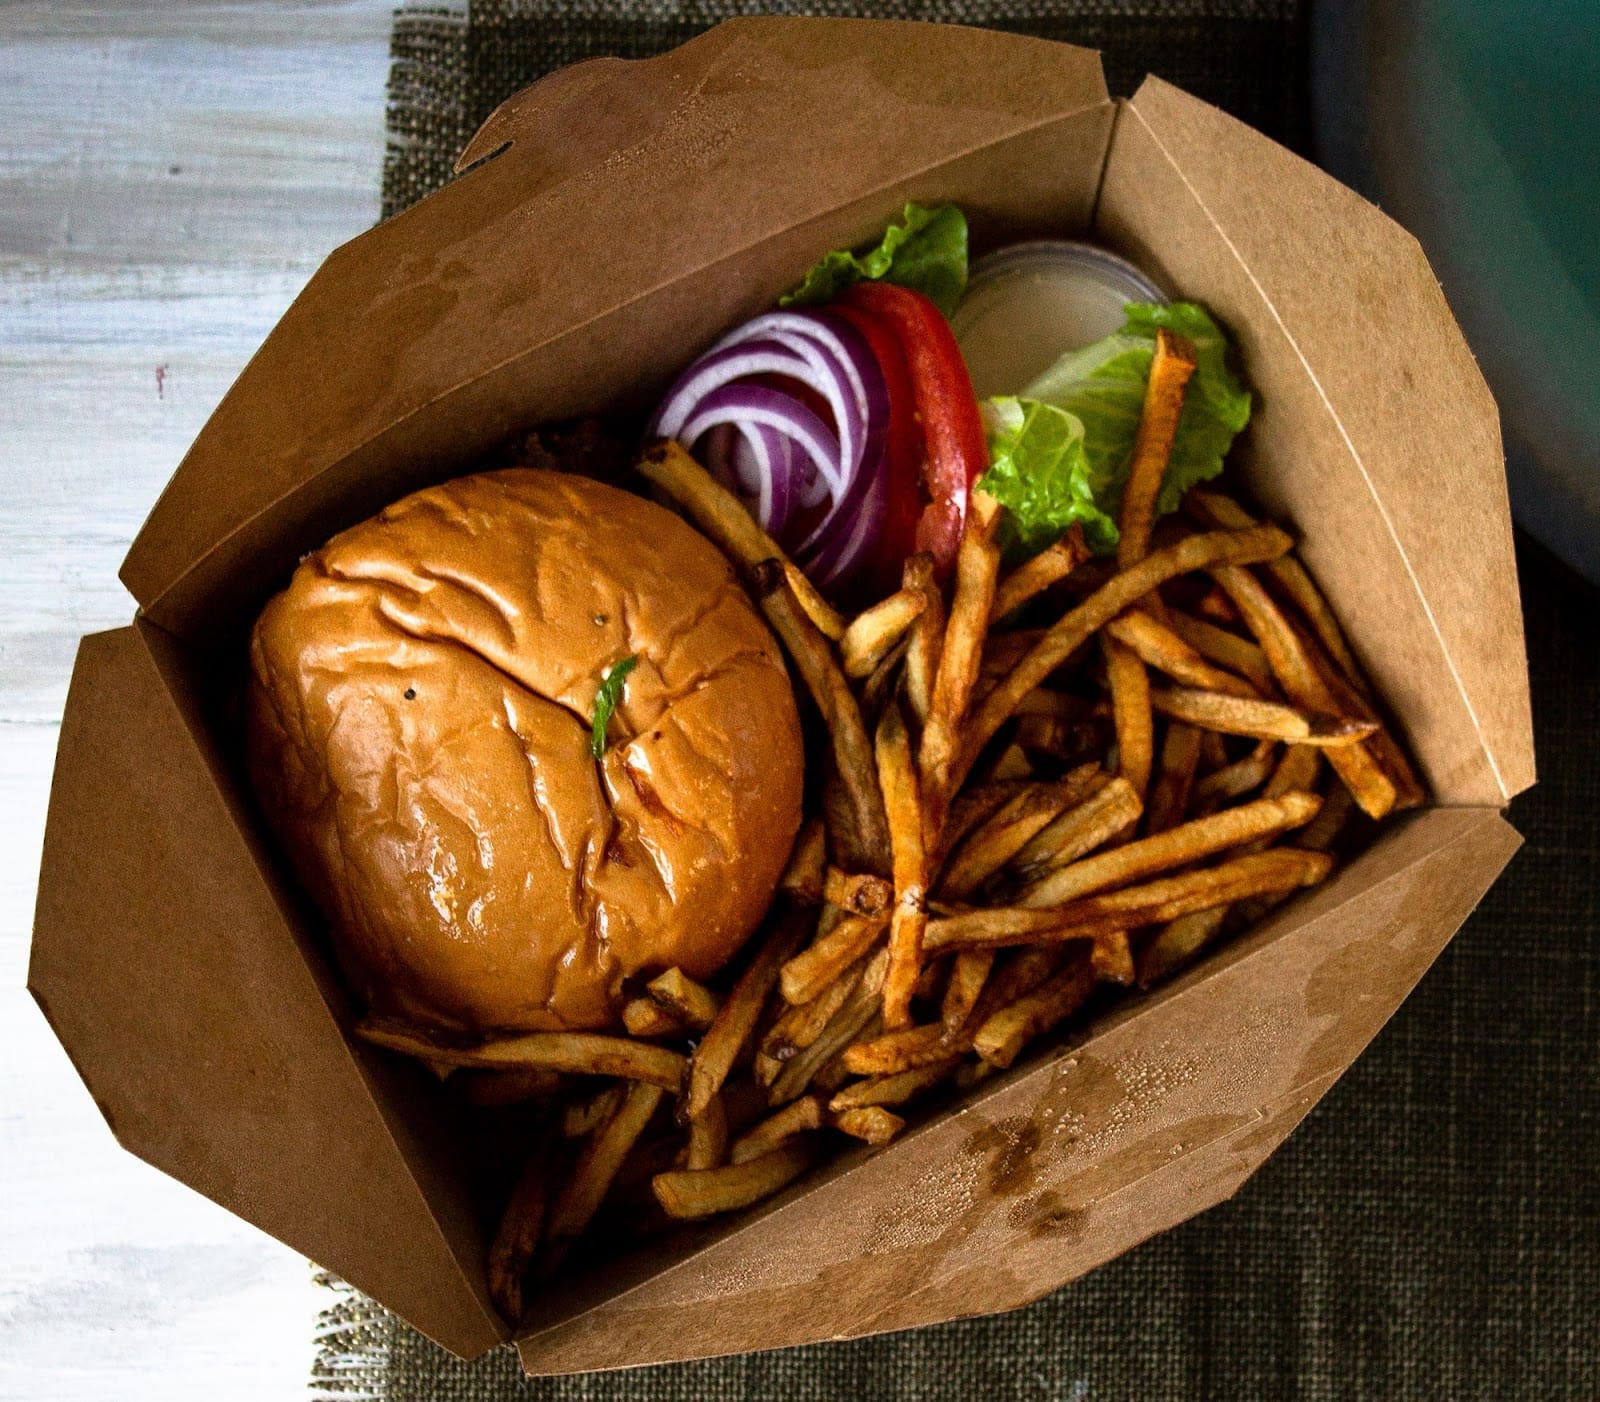 Burger and fries in a takeout box